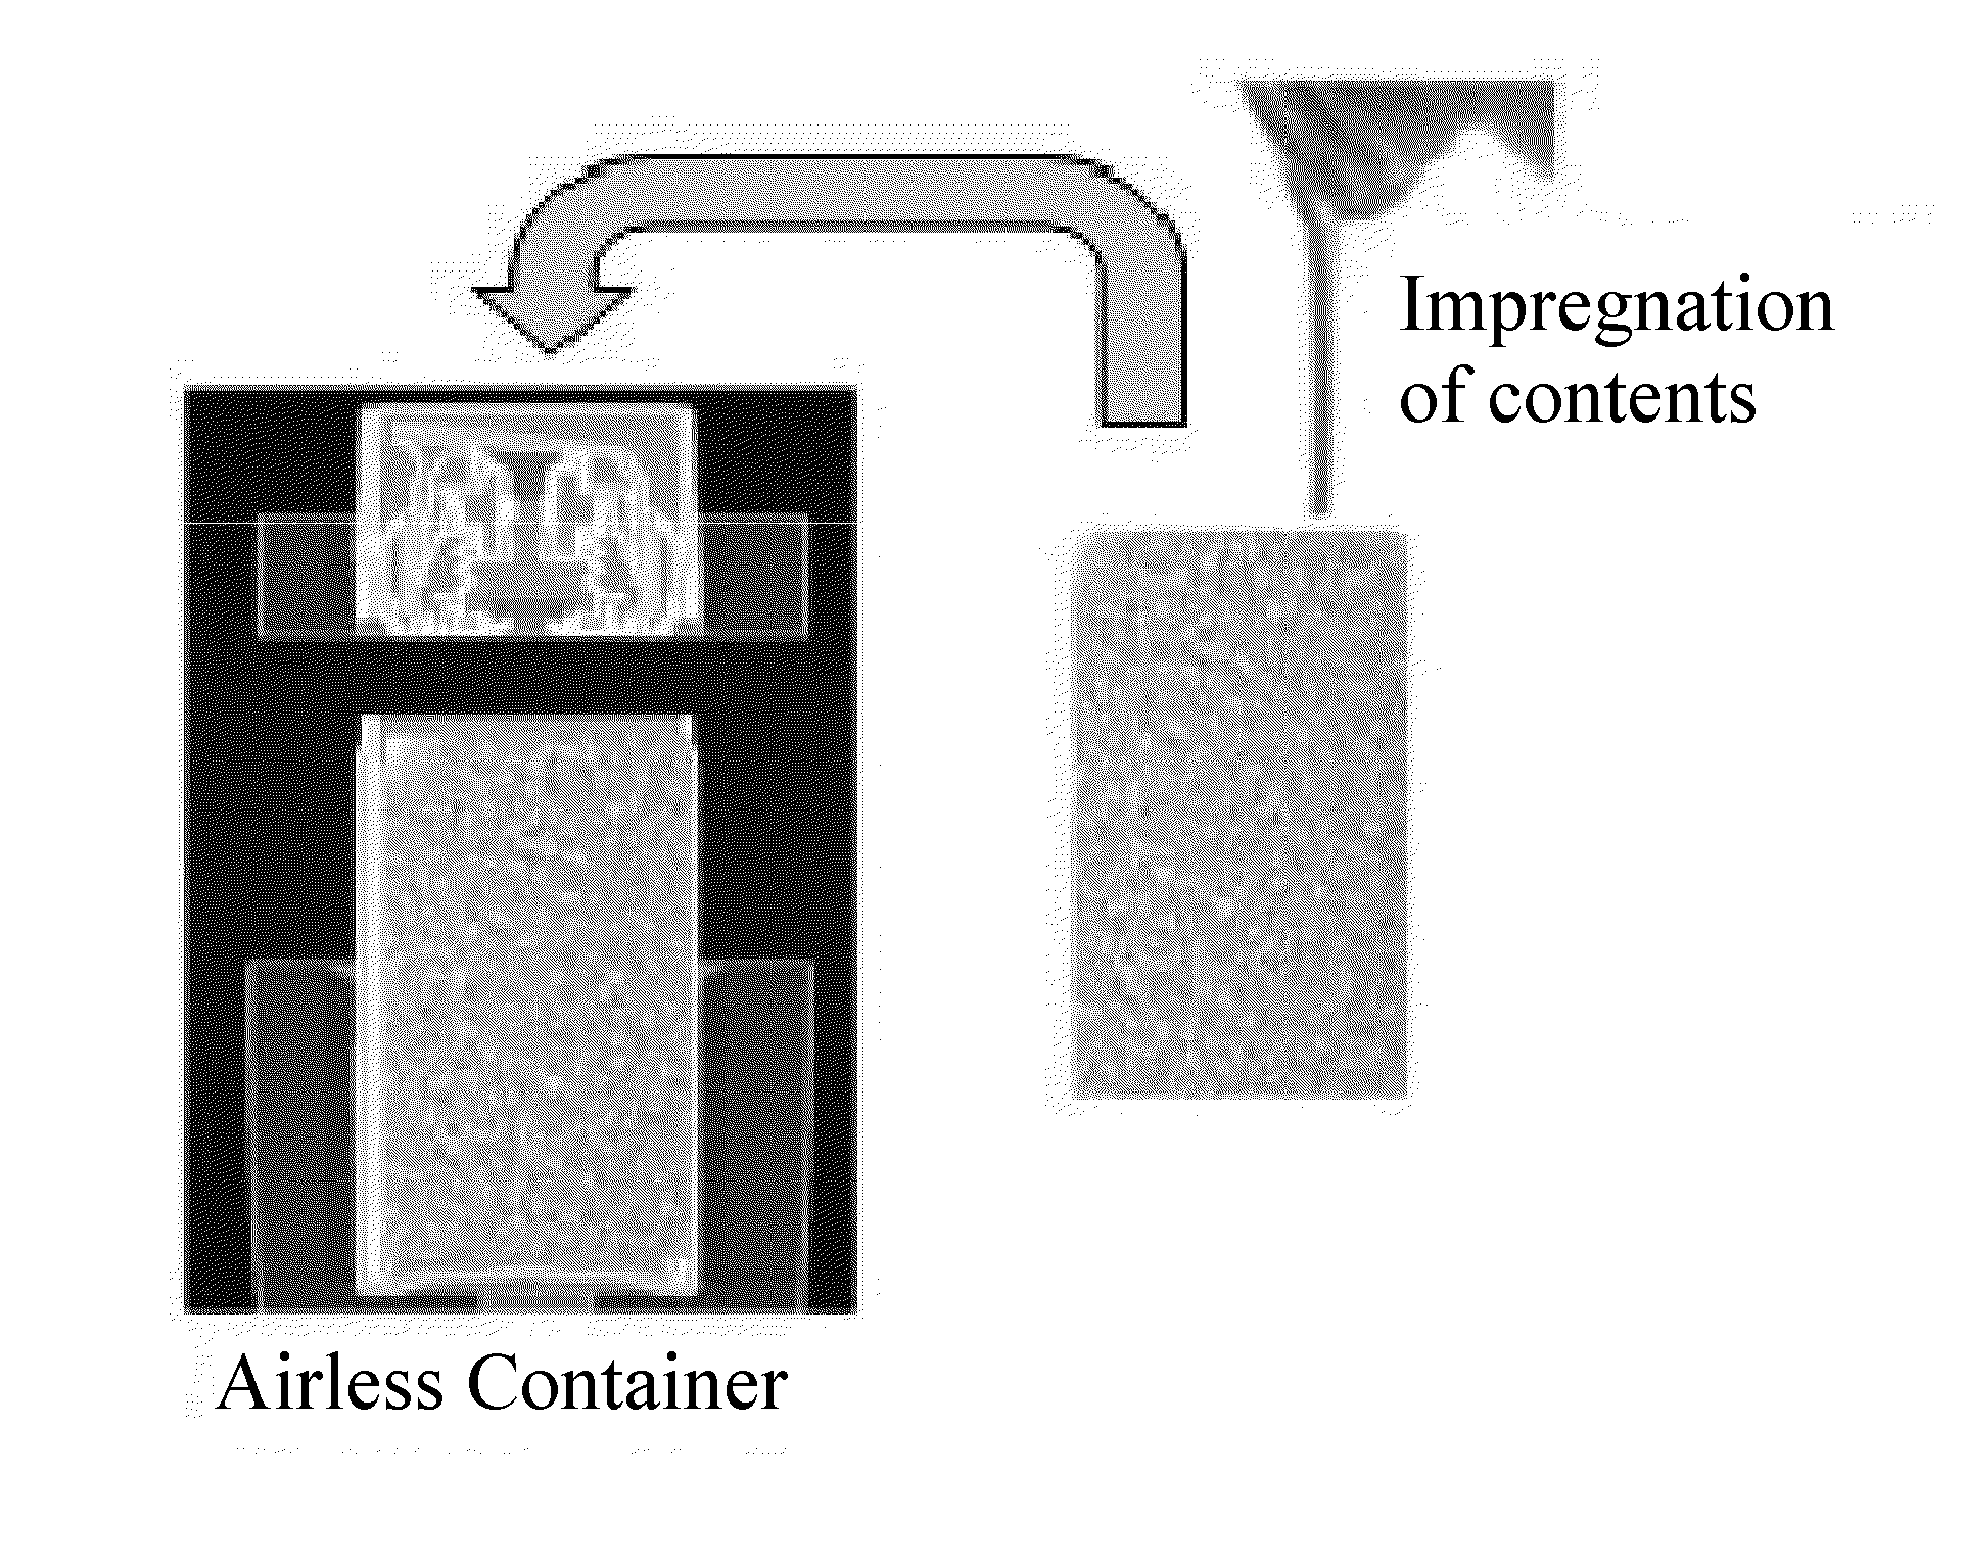 Cosmetic composition prepared by impregnation in urethane foam